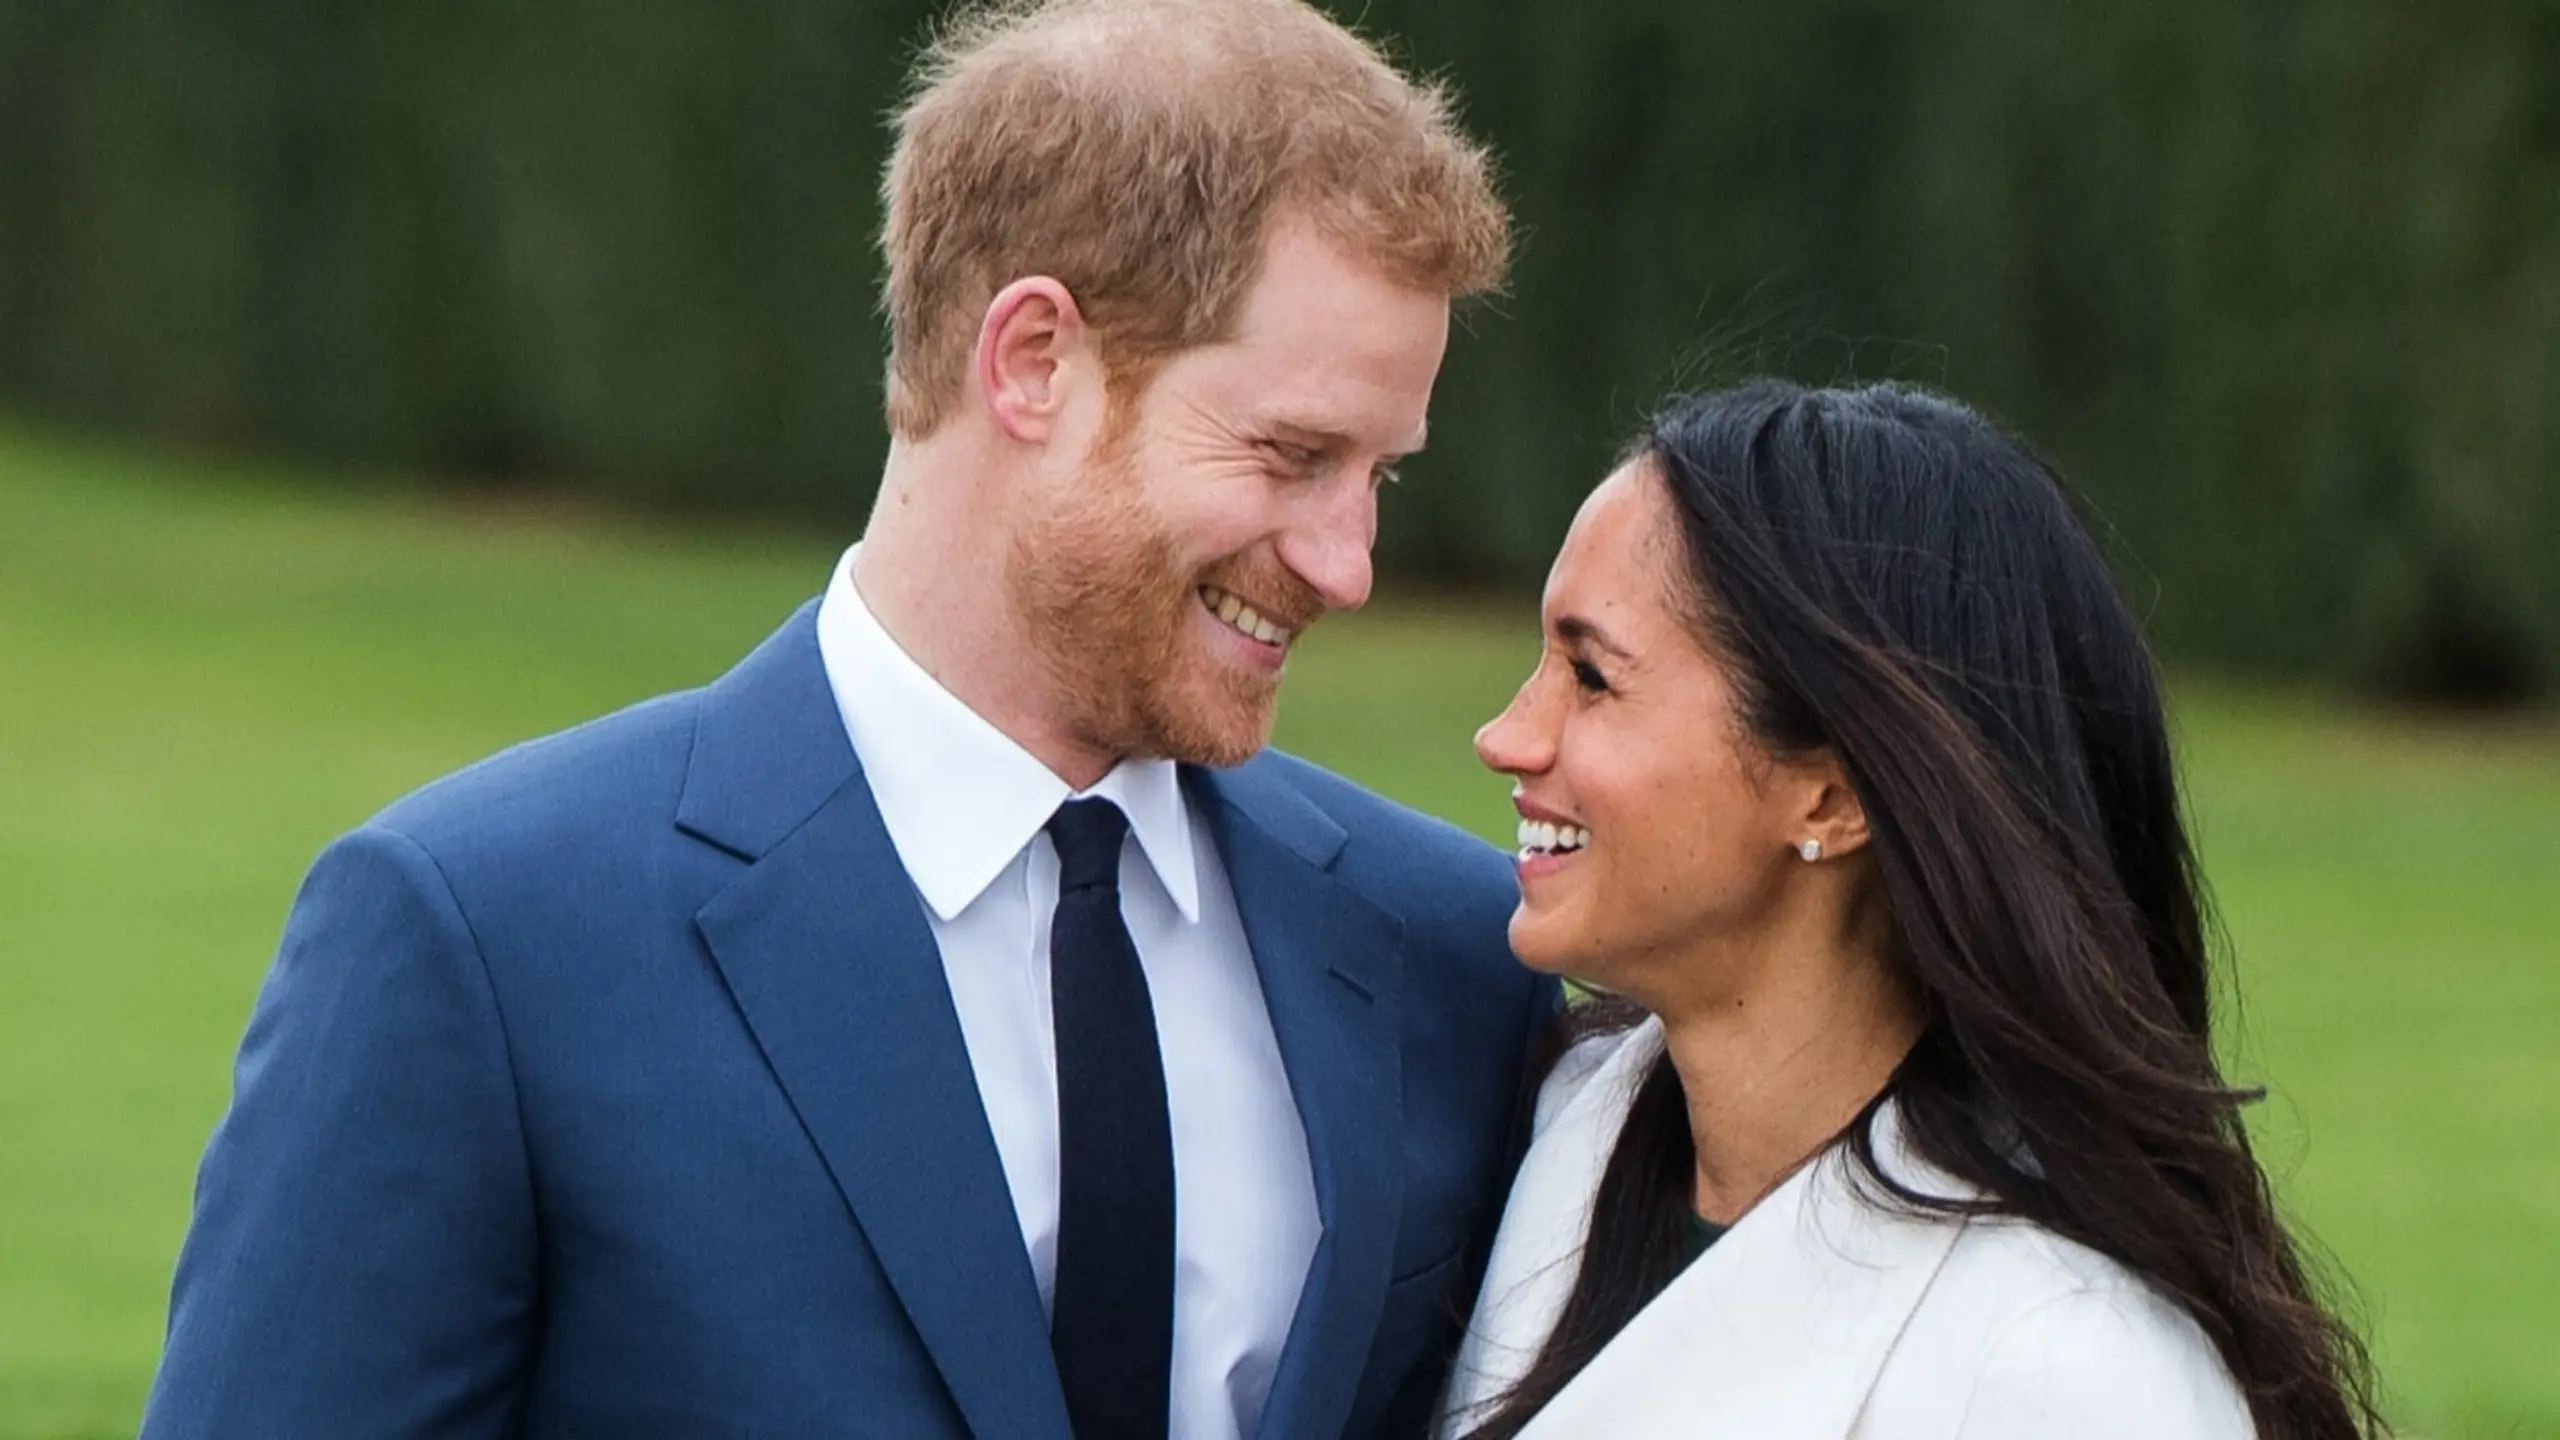 Harry and Meghan : The Next Step